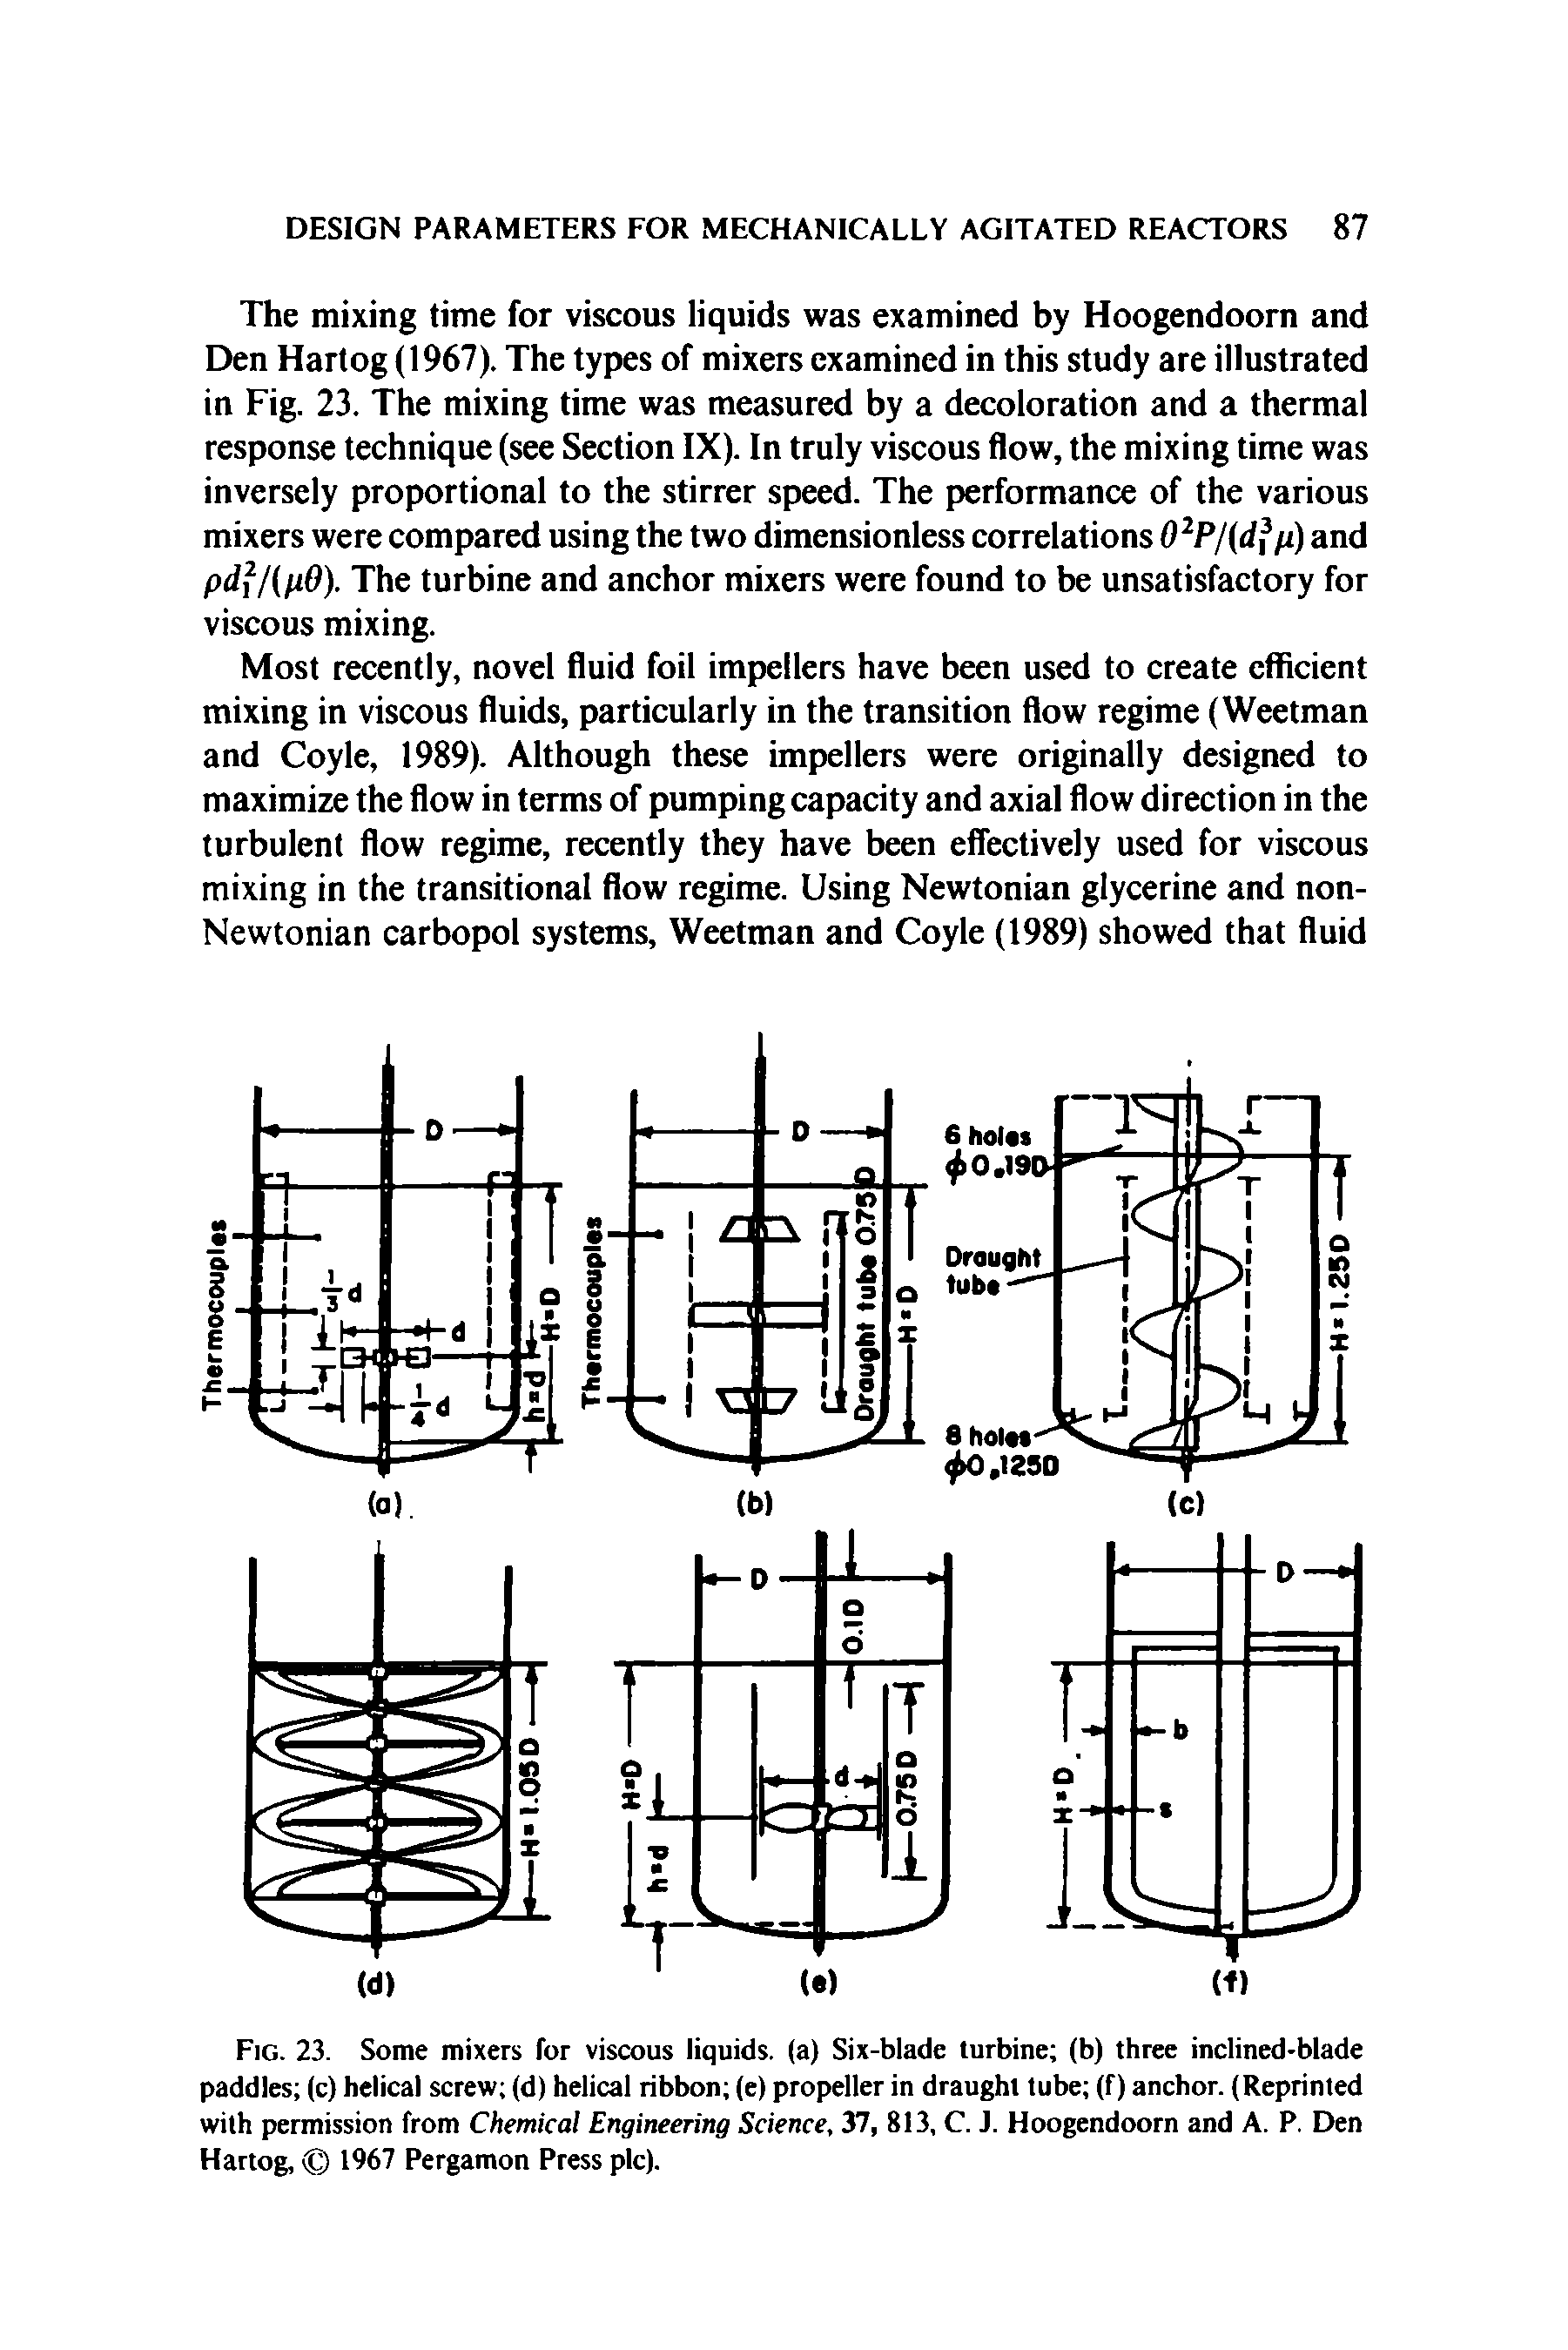 Fig. 23. Some mixers for viscous liquids, (a) Six-blade turbine (b) three inclined-blade paddles (c) helical screw (d) helical ribbon (e) propeller in draught tube (f) anchor. (Reprinted with permission from Chemical Engineering Science, 37, 813, C. J. Hoogendoorn and A. P. Den Hartog, 1967 Pergamon Press pic).